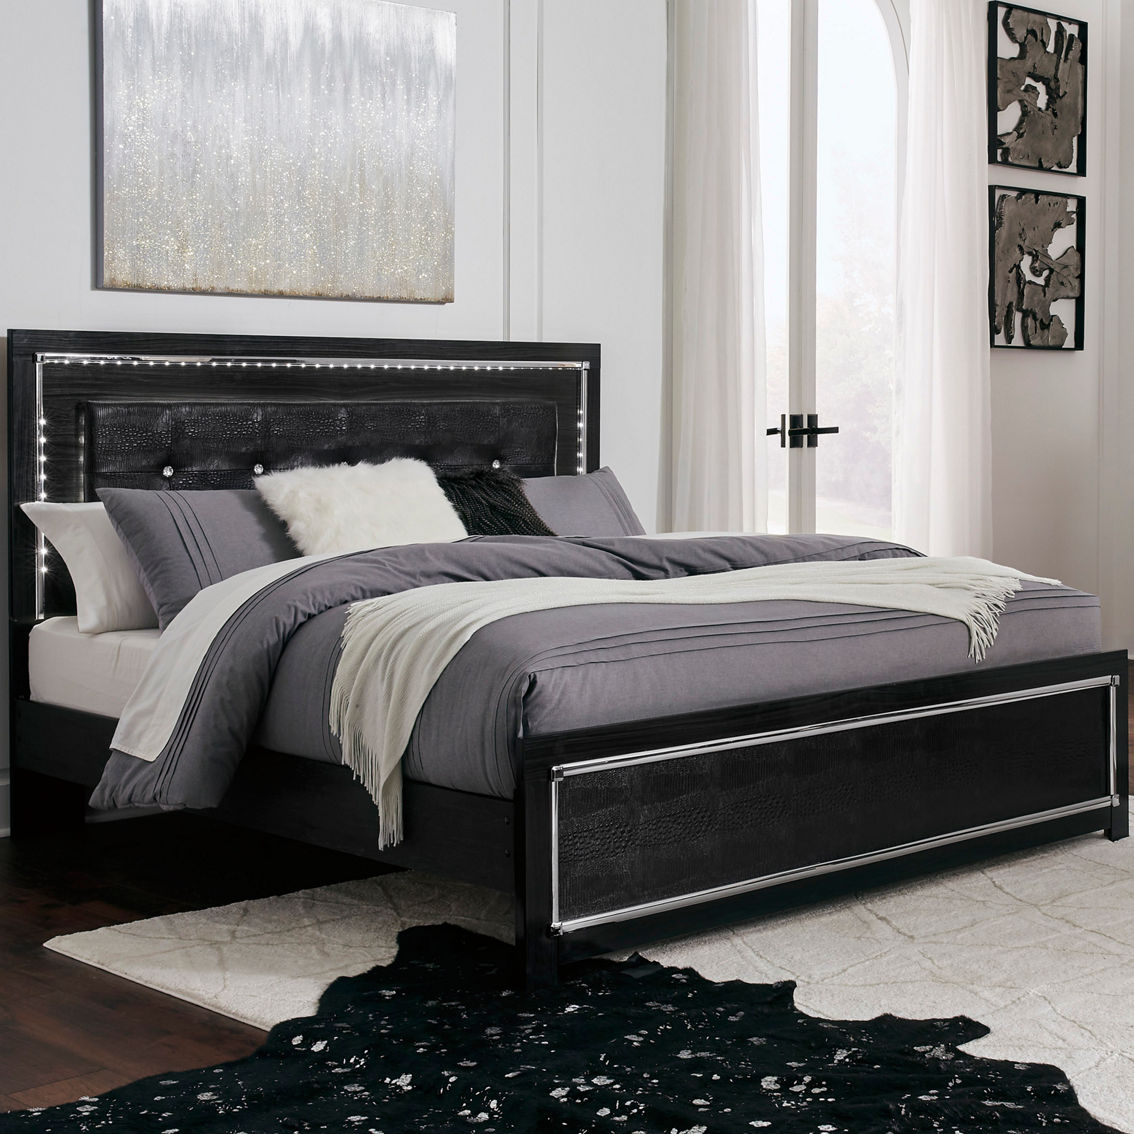 Signature Design by Ashley Kaydell Panel Bedroom 5 pc. Set - Image 2 of 8